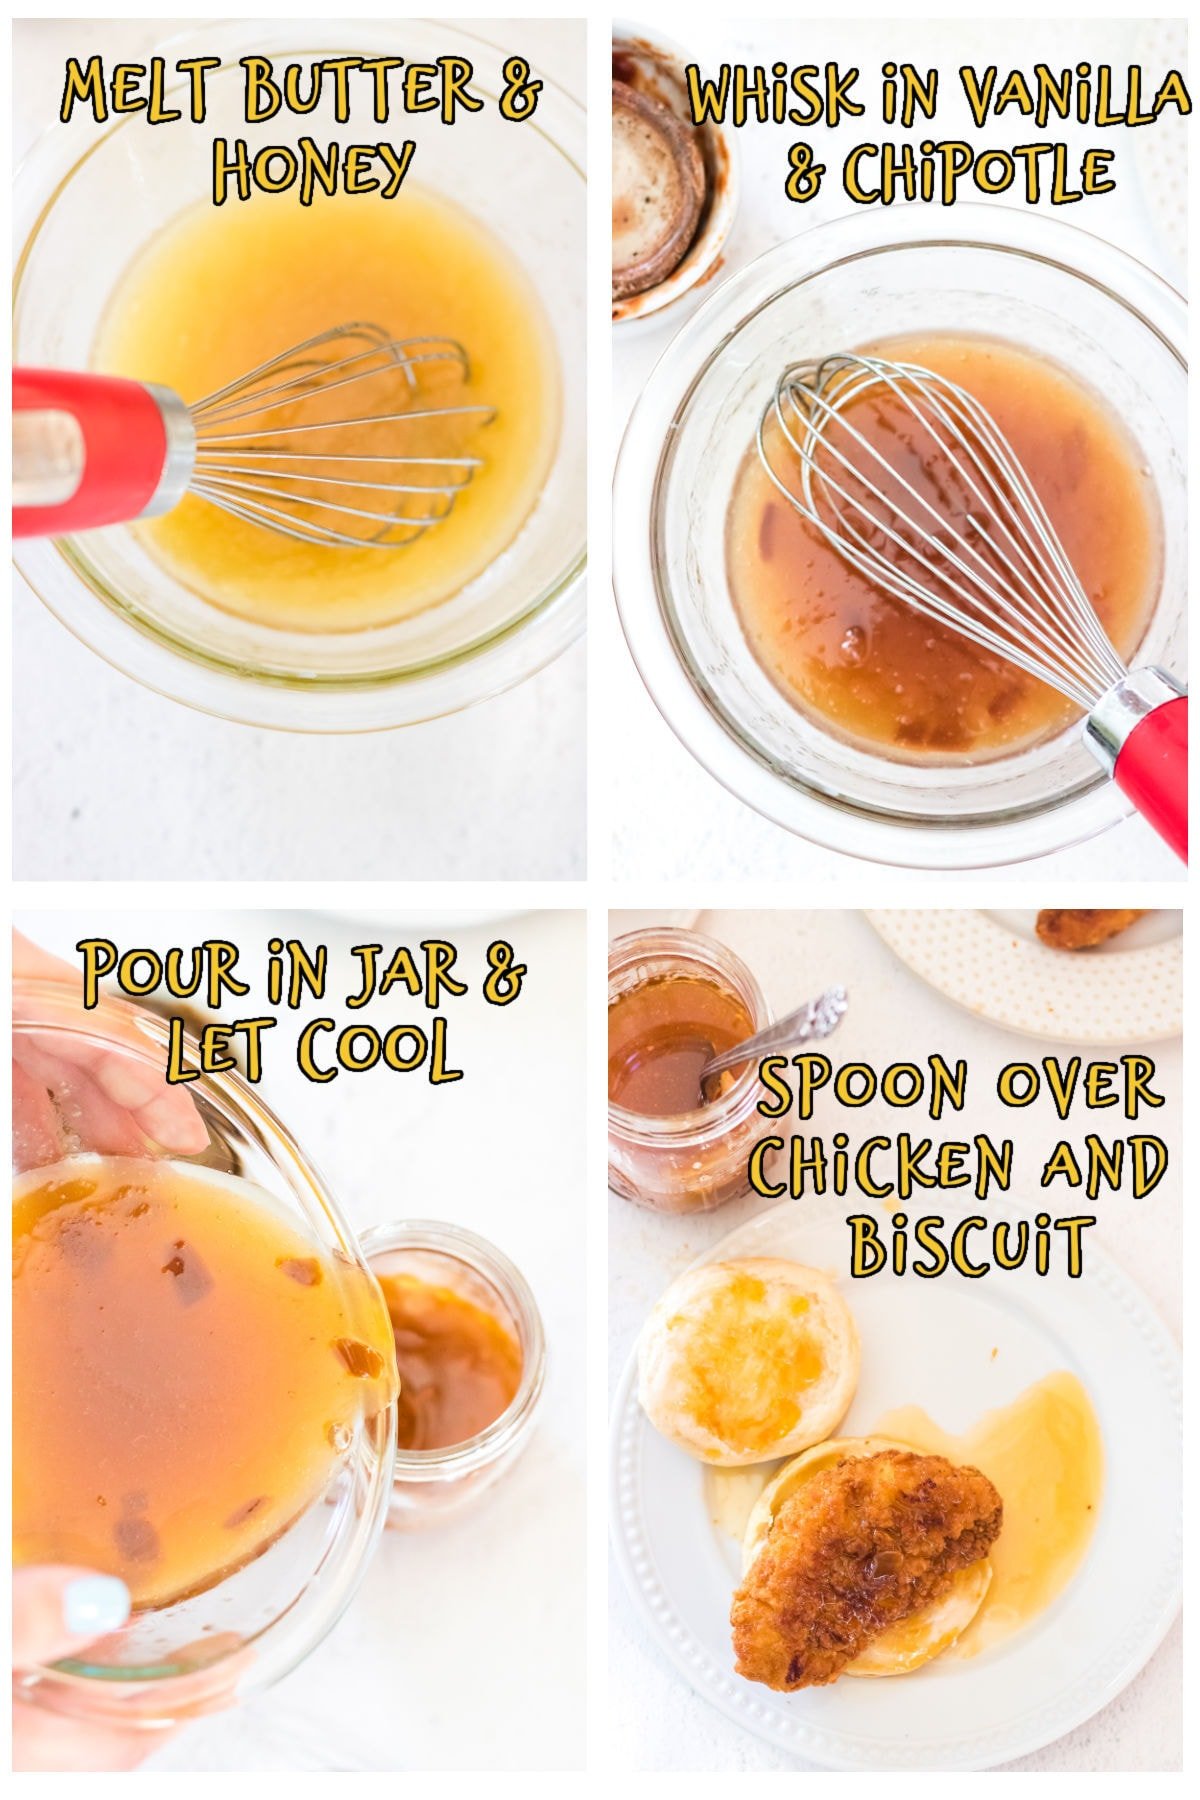 Step by step images for making honey butter chicken biscuits similar to Whataburger.